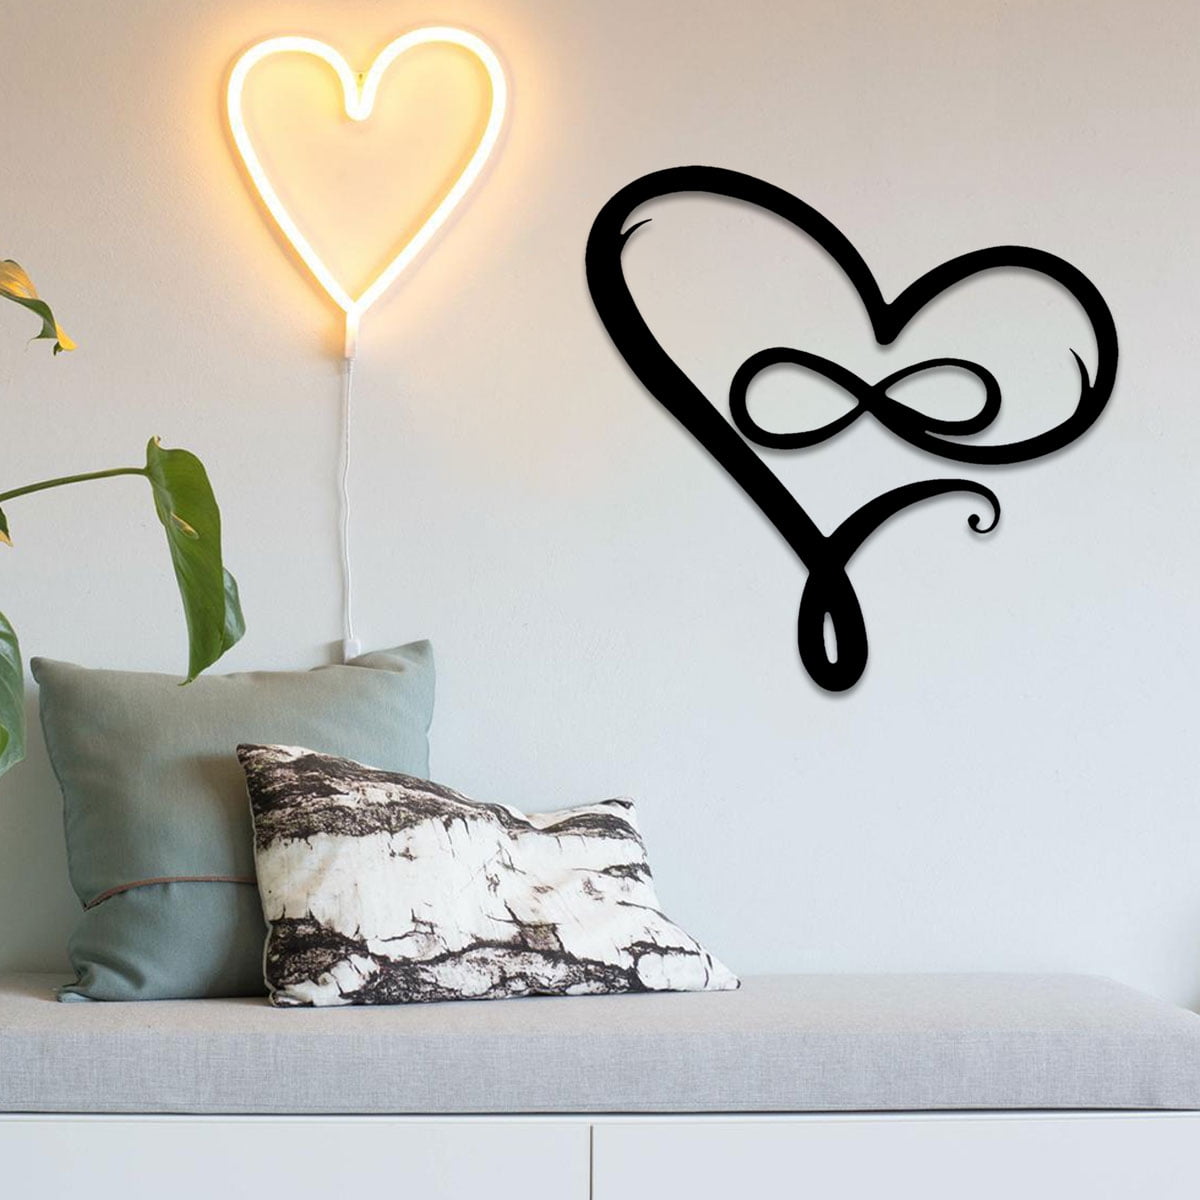 Office Family Metal Wall Sign Black Heart Family Sign Decorative Art Wall Sign Geometric Metal Wall Decor Decorative Black Word Sign Farmhouse Metal Wall Sign for Home Living Room Decor